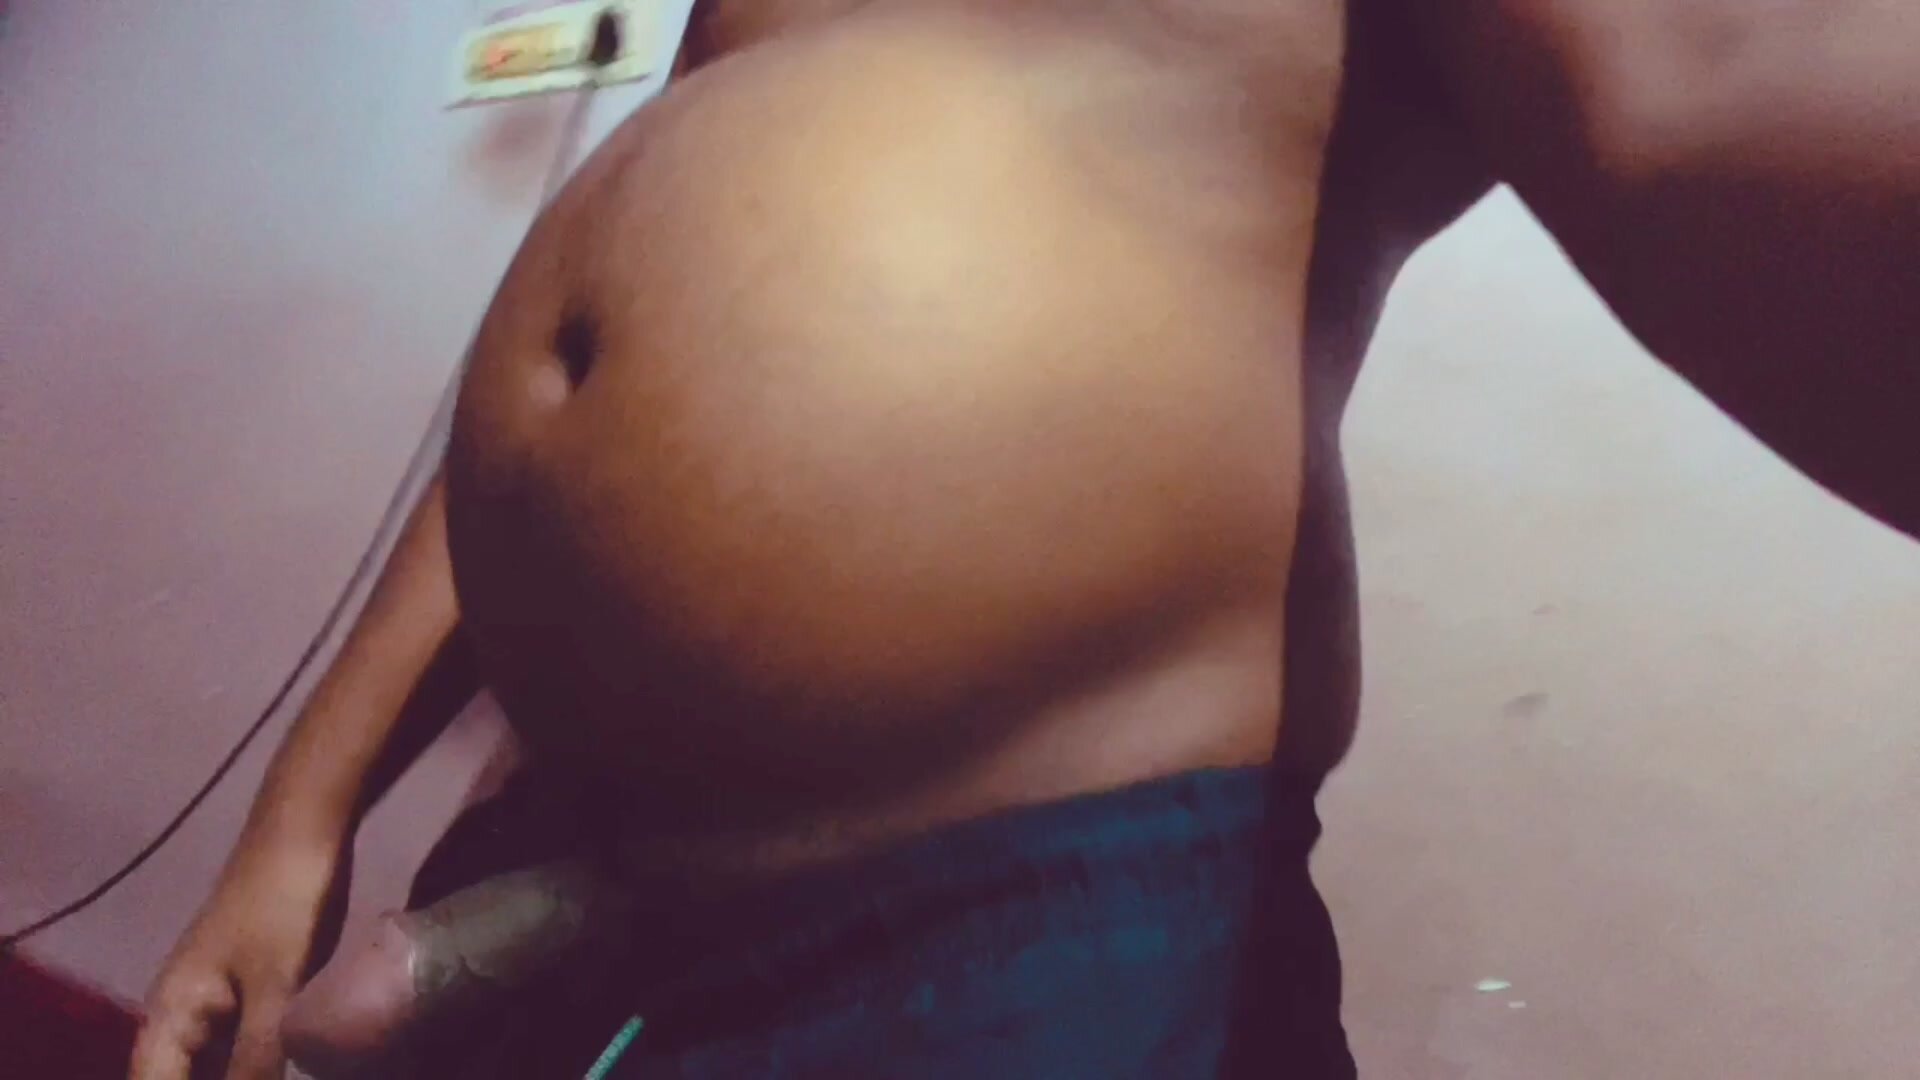 Indian Belly